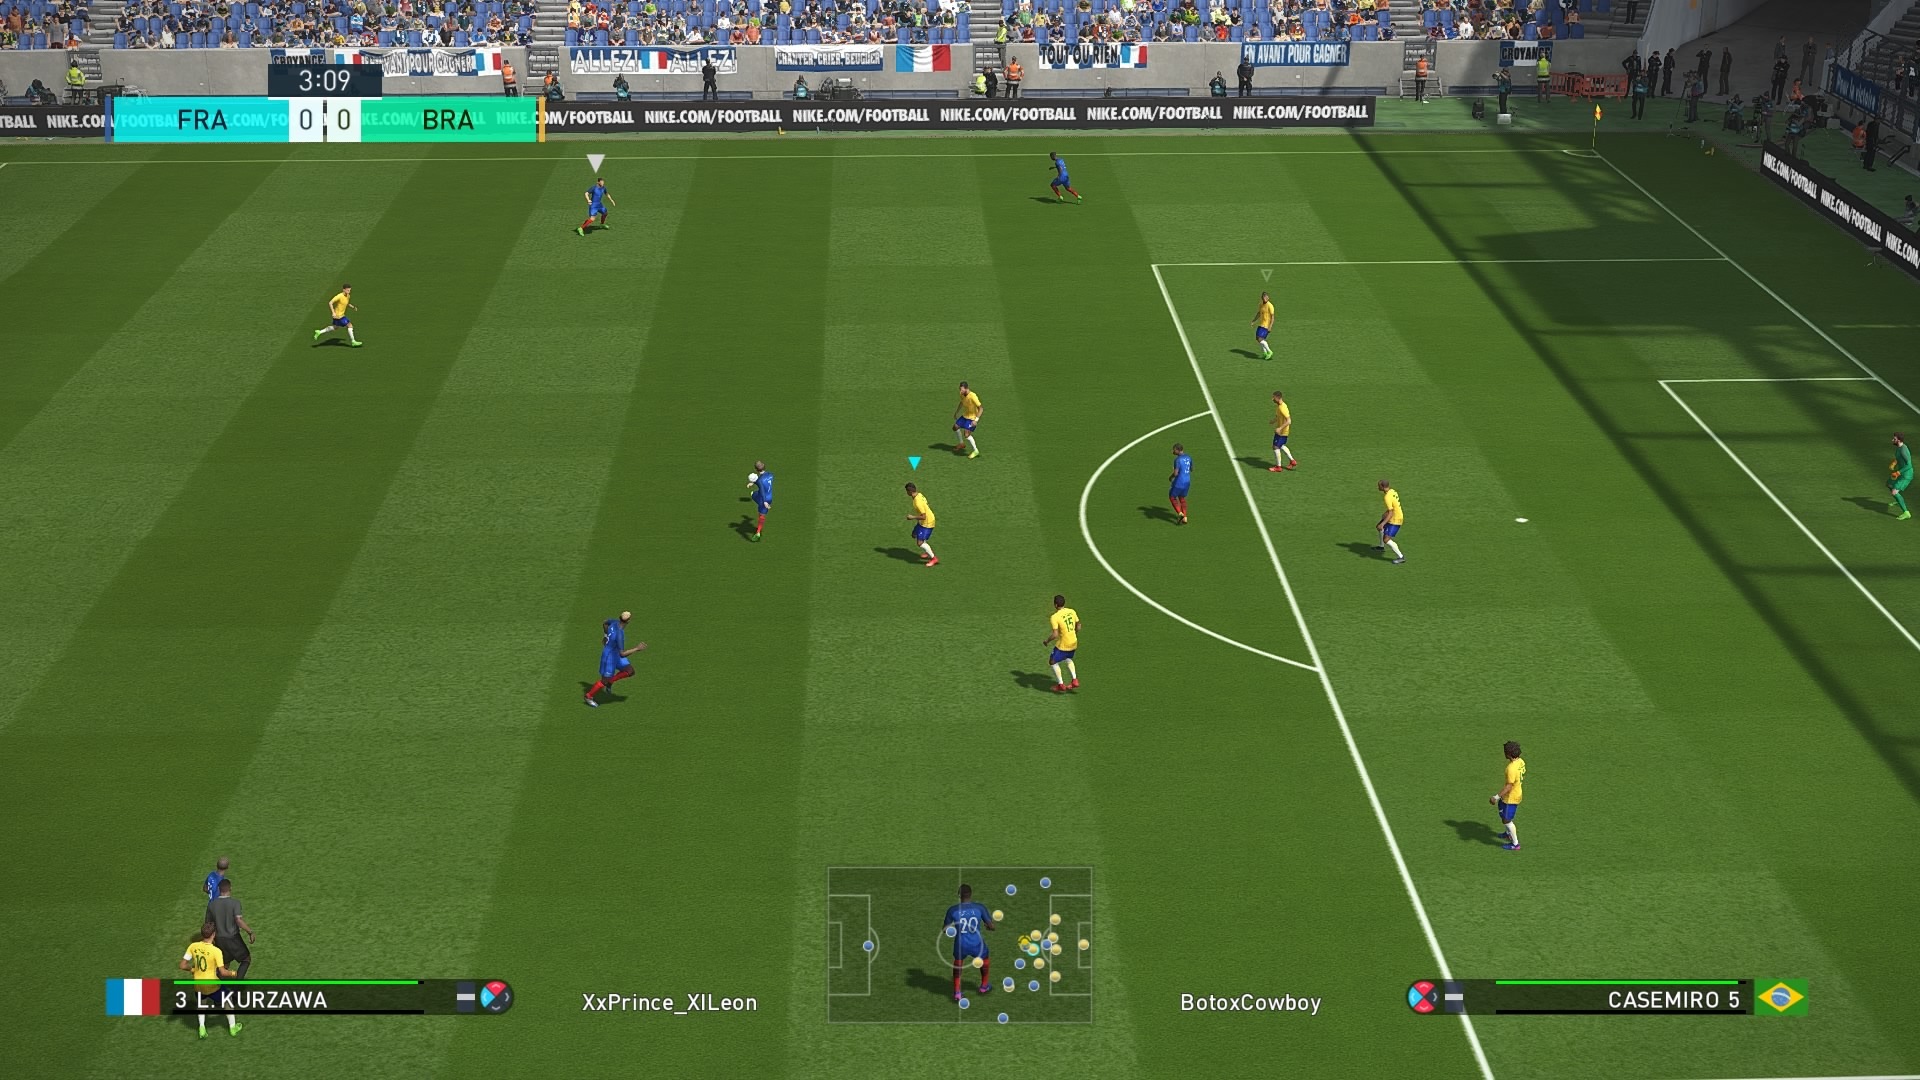 5. There’s an extra player indicator